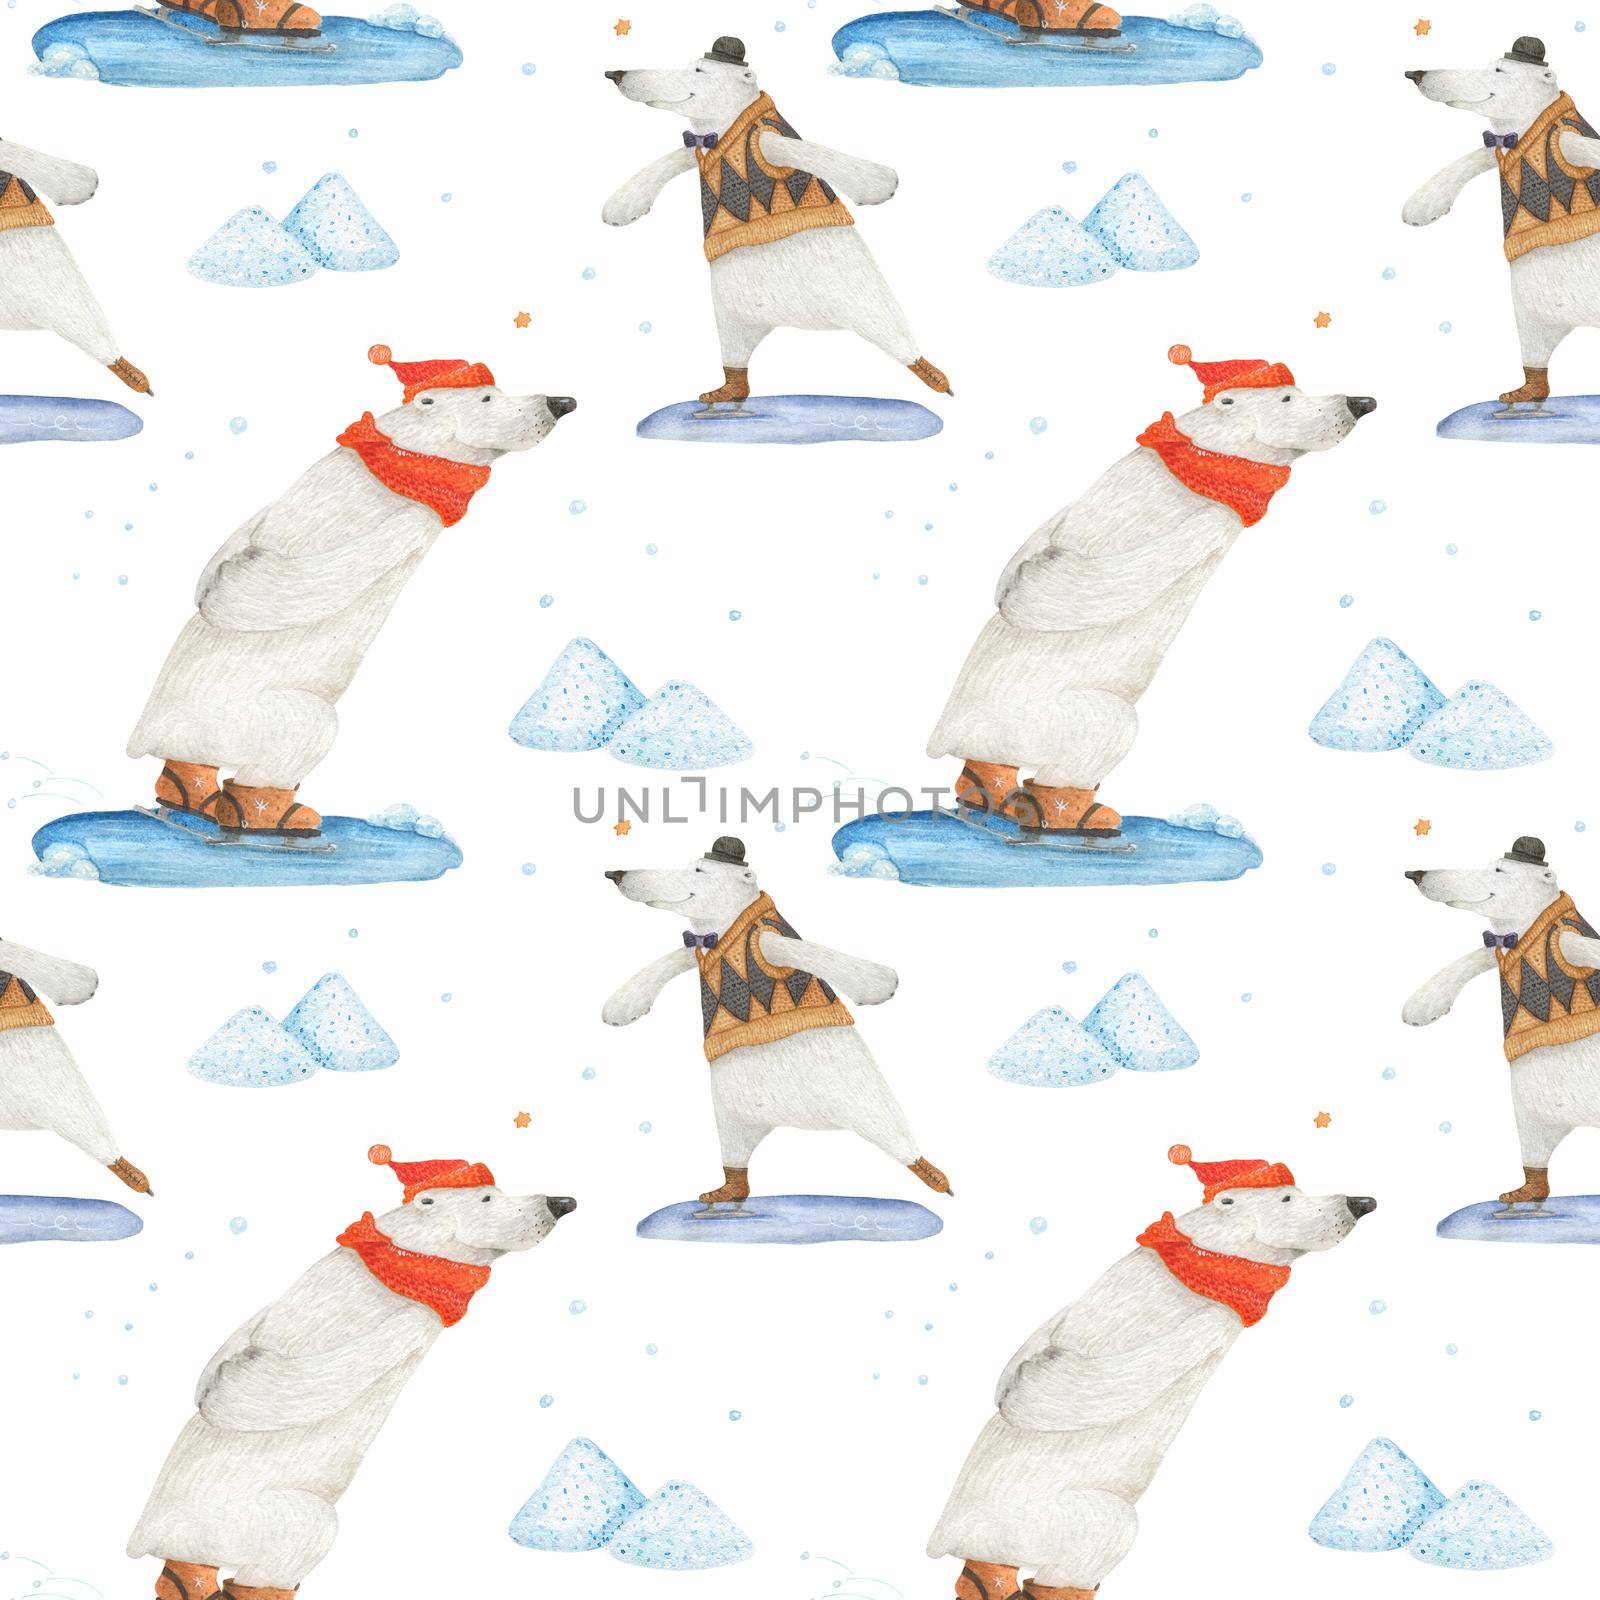 Polar bear winter fun. Arctic bears skate. Watercolor seamless patterns for textile, wrapping paper and any tiled design. White background, clipping path uncluded